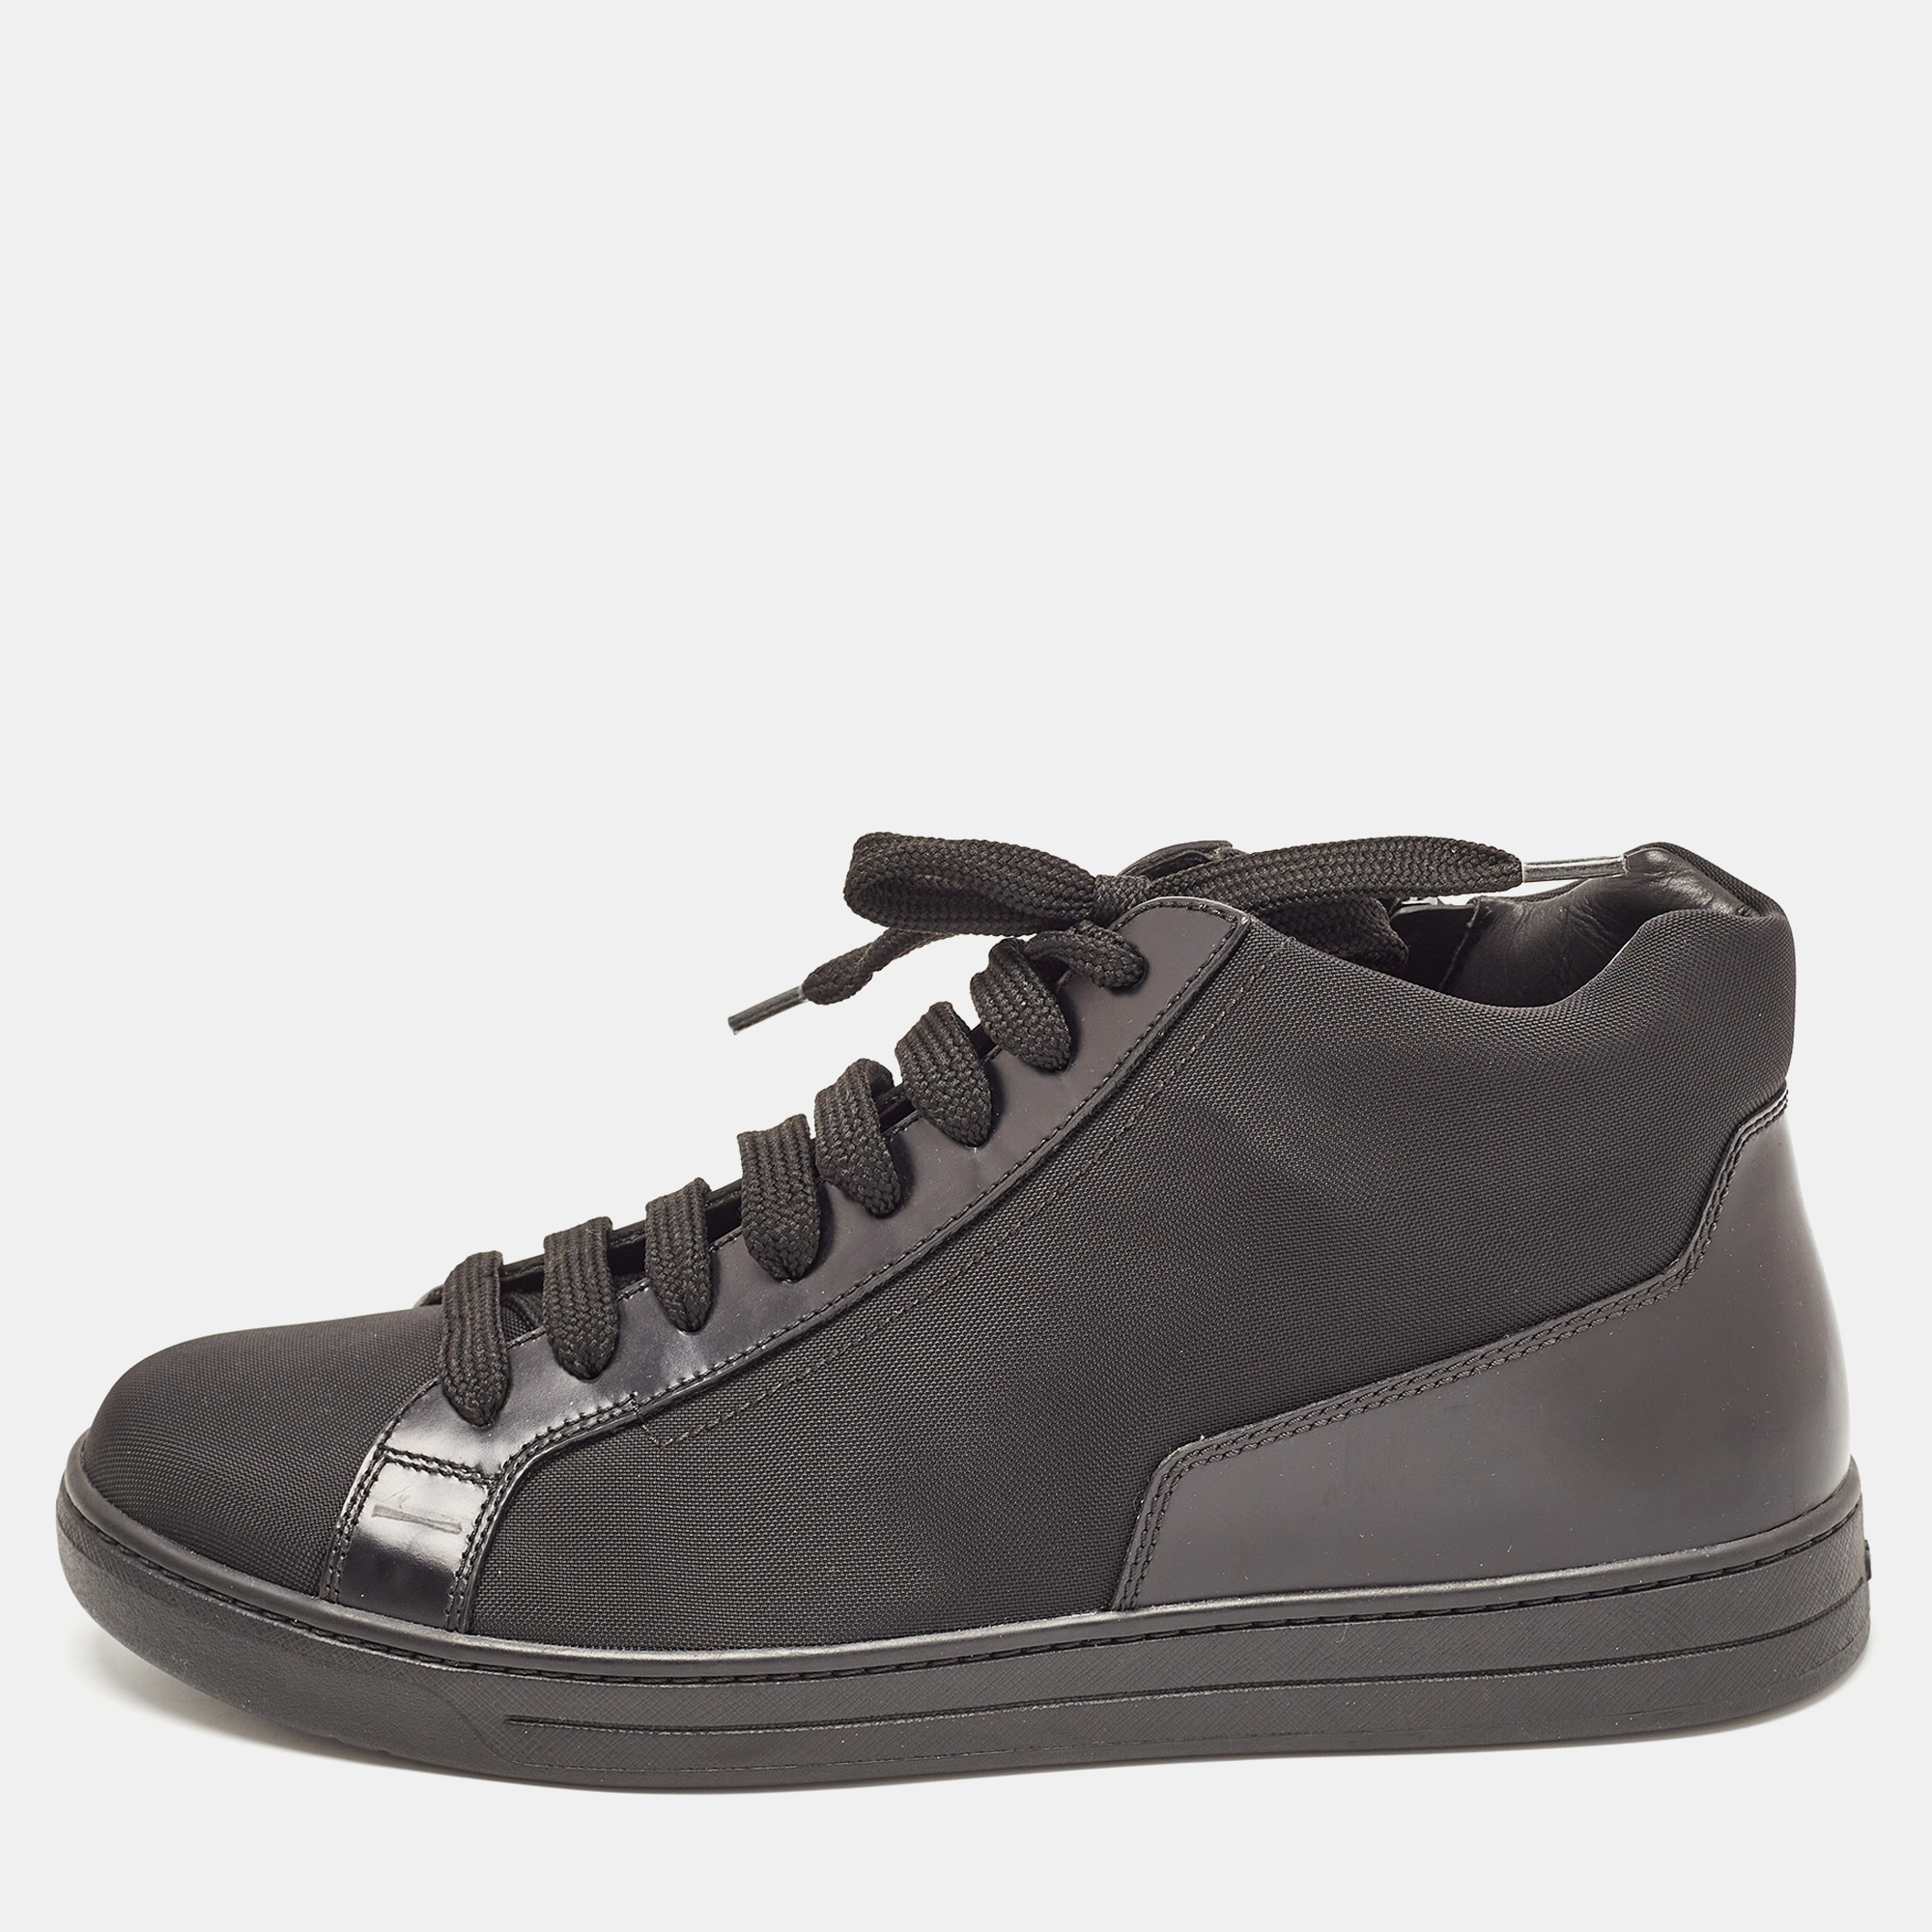 Prada Sport Black Nylon And Leather Mid Top Sneakers Size 43